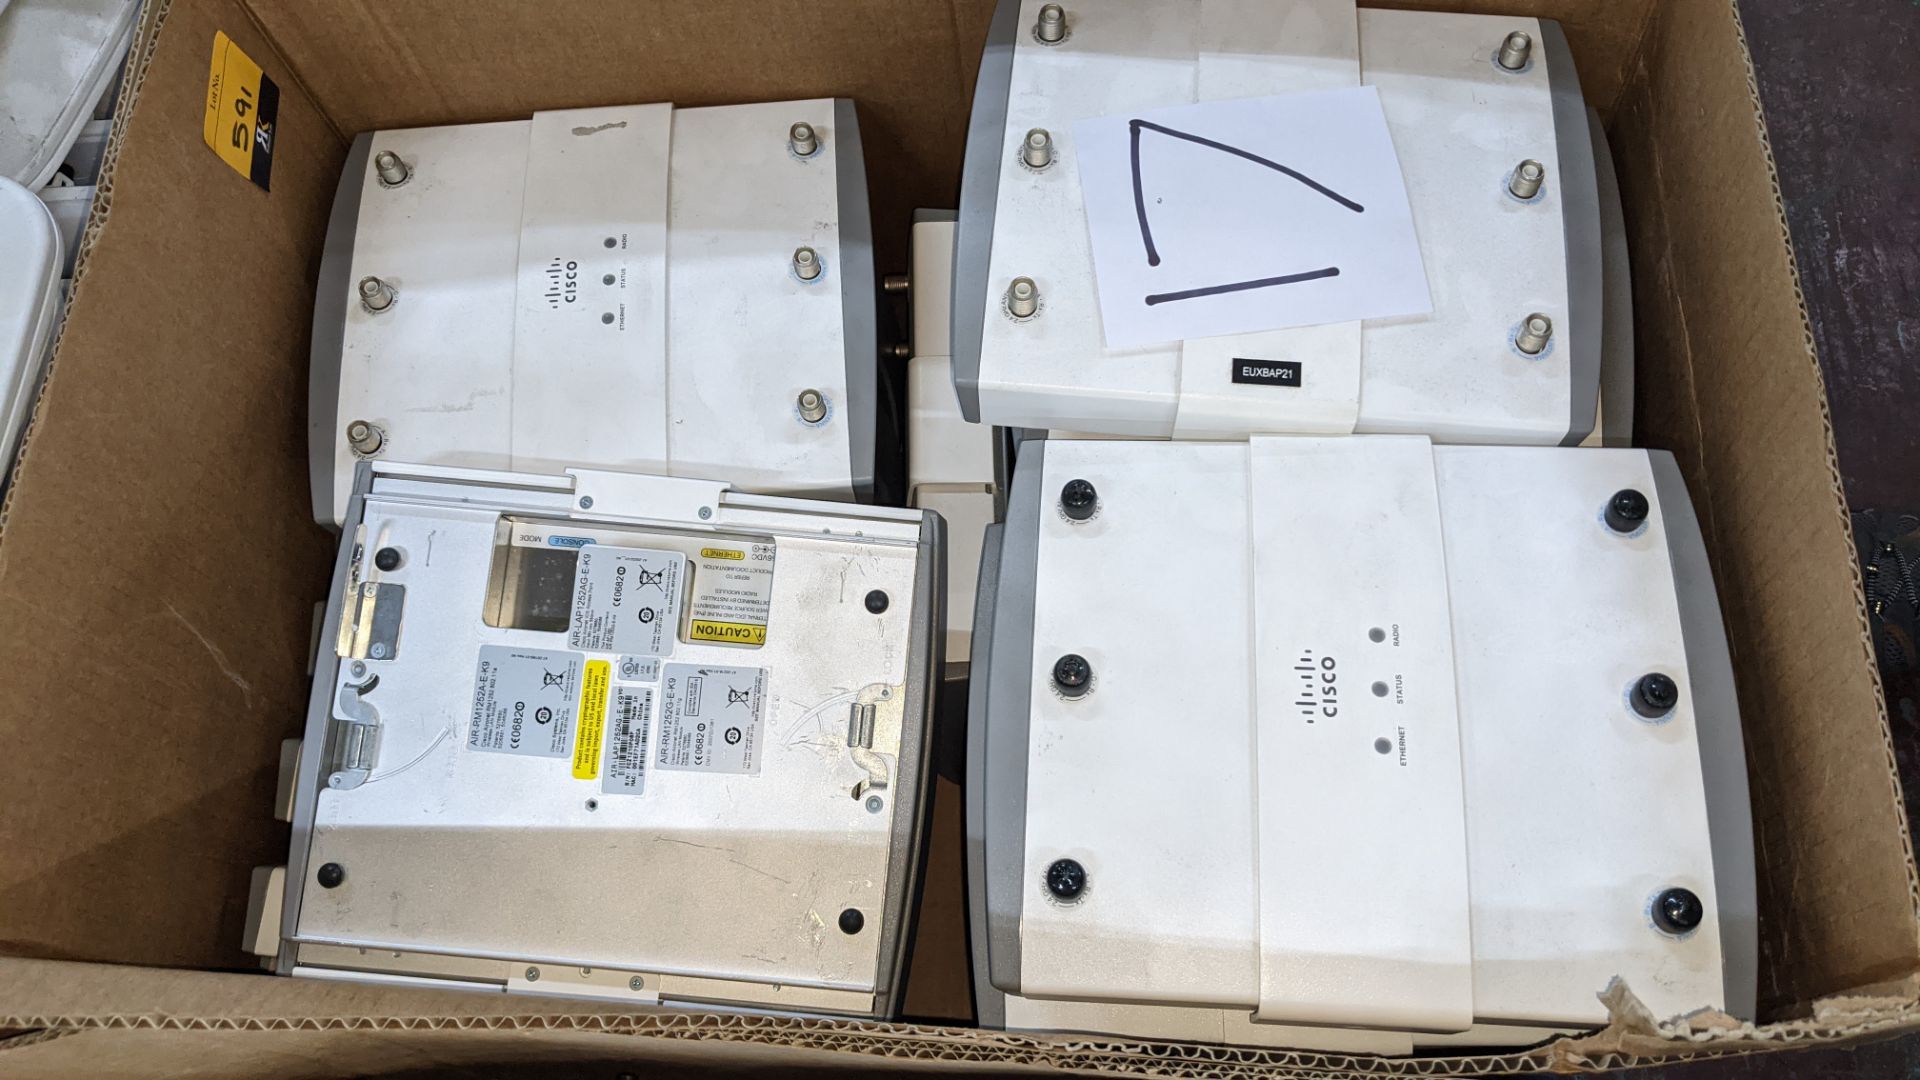 17 off Cisco wireless access points model 1252 - main unit only, no power supply or box - Image 3 of 4